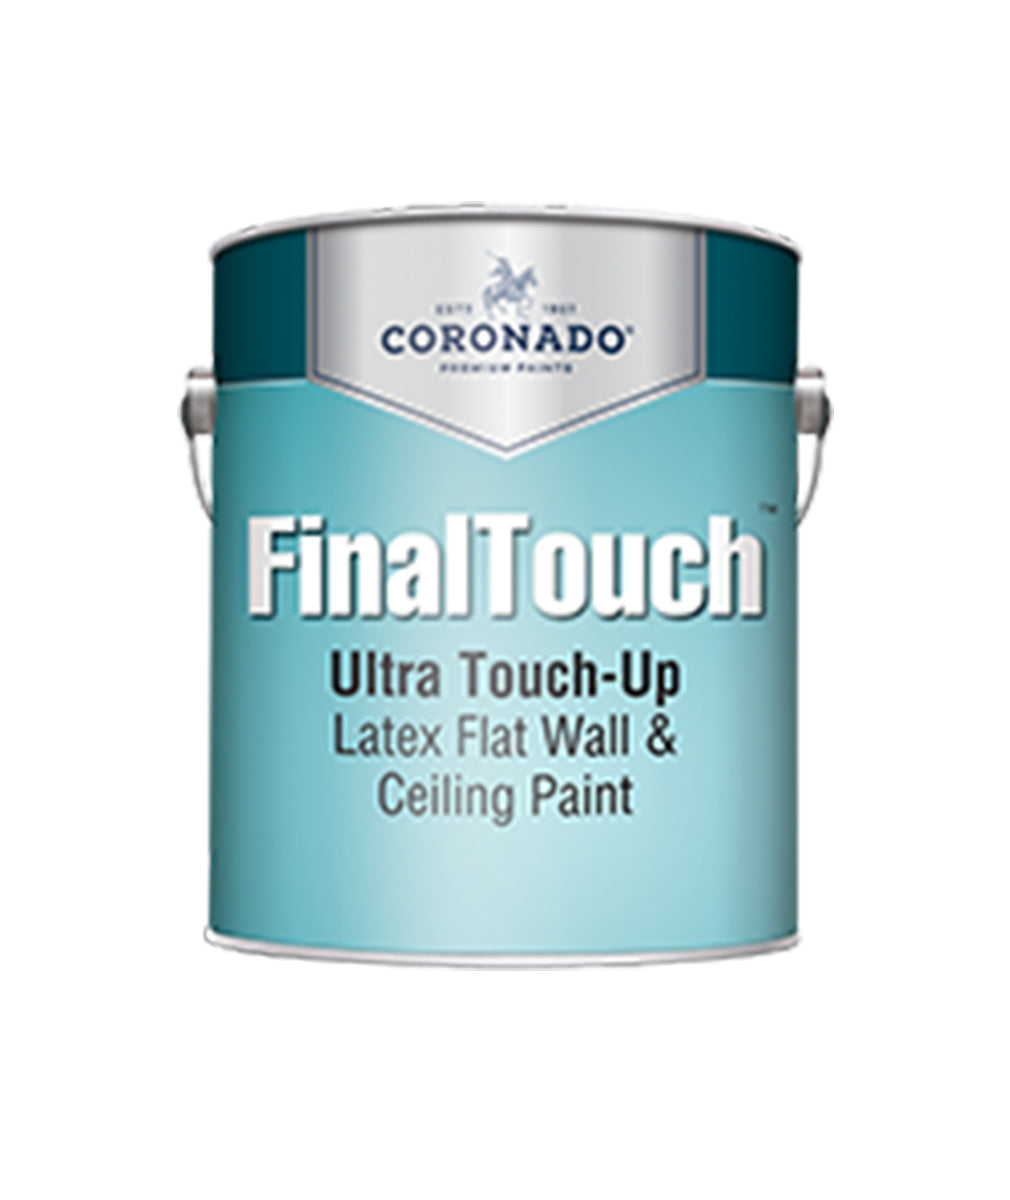 Coronado Final Touch Ceiling Paint Available at Regal Paint Centers in Maryland.